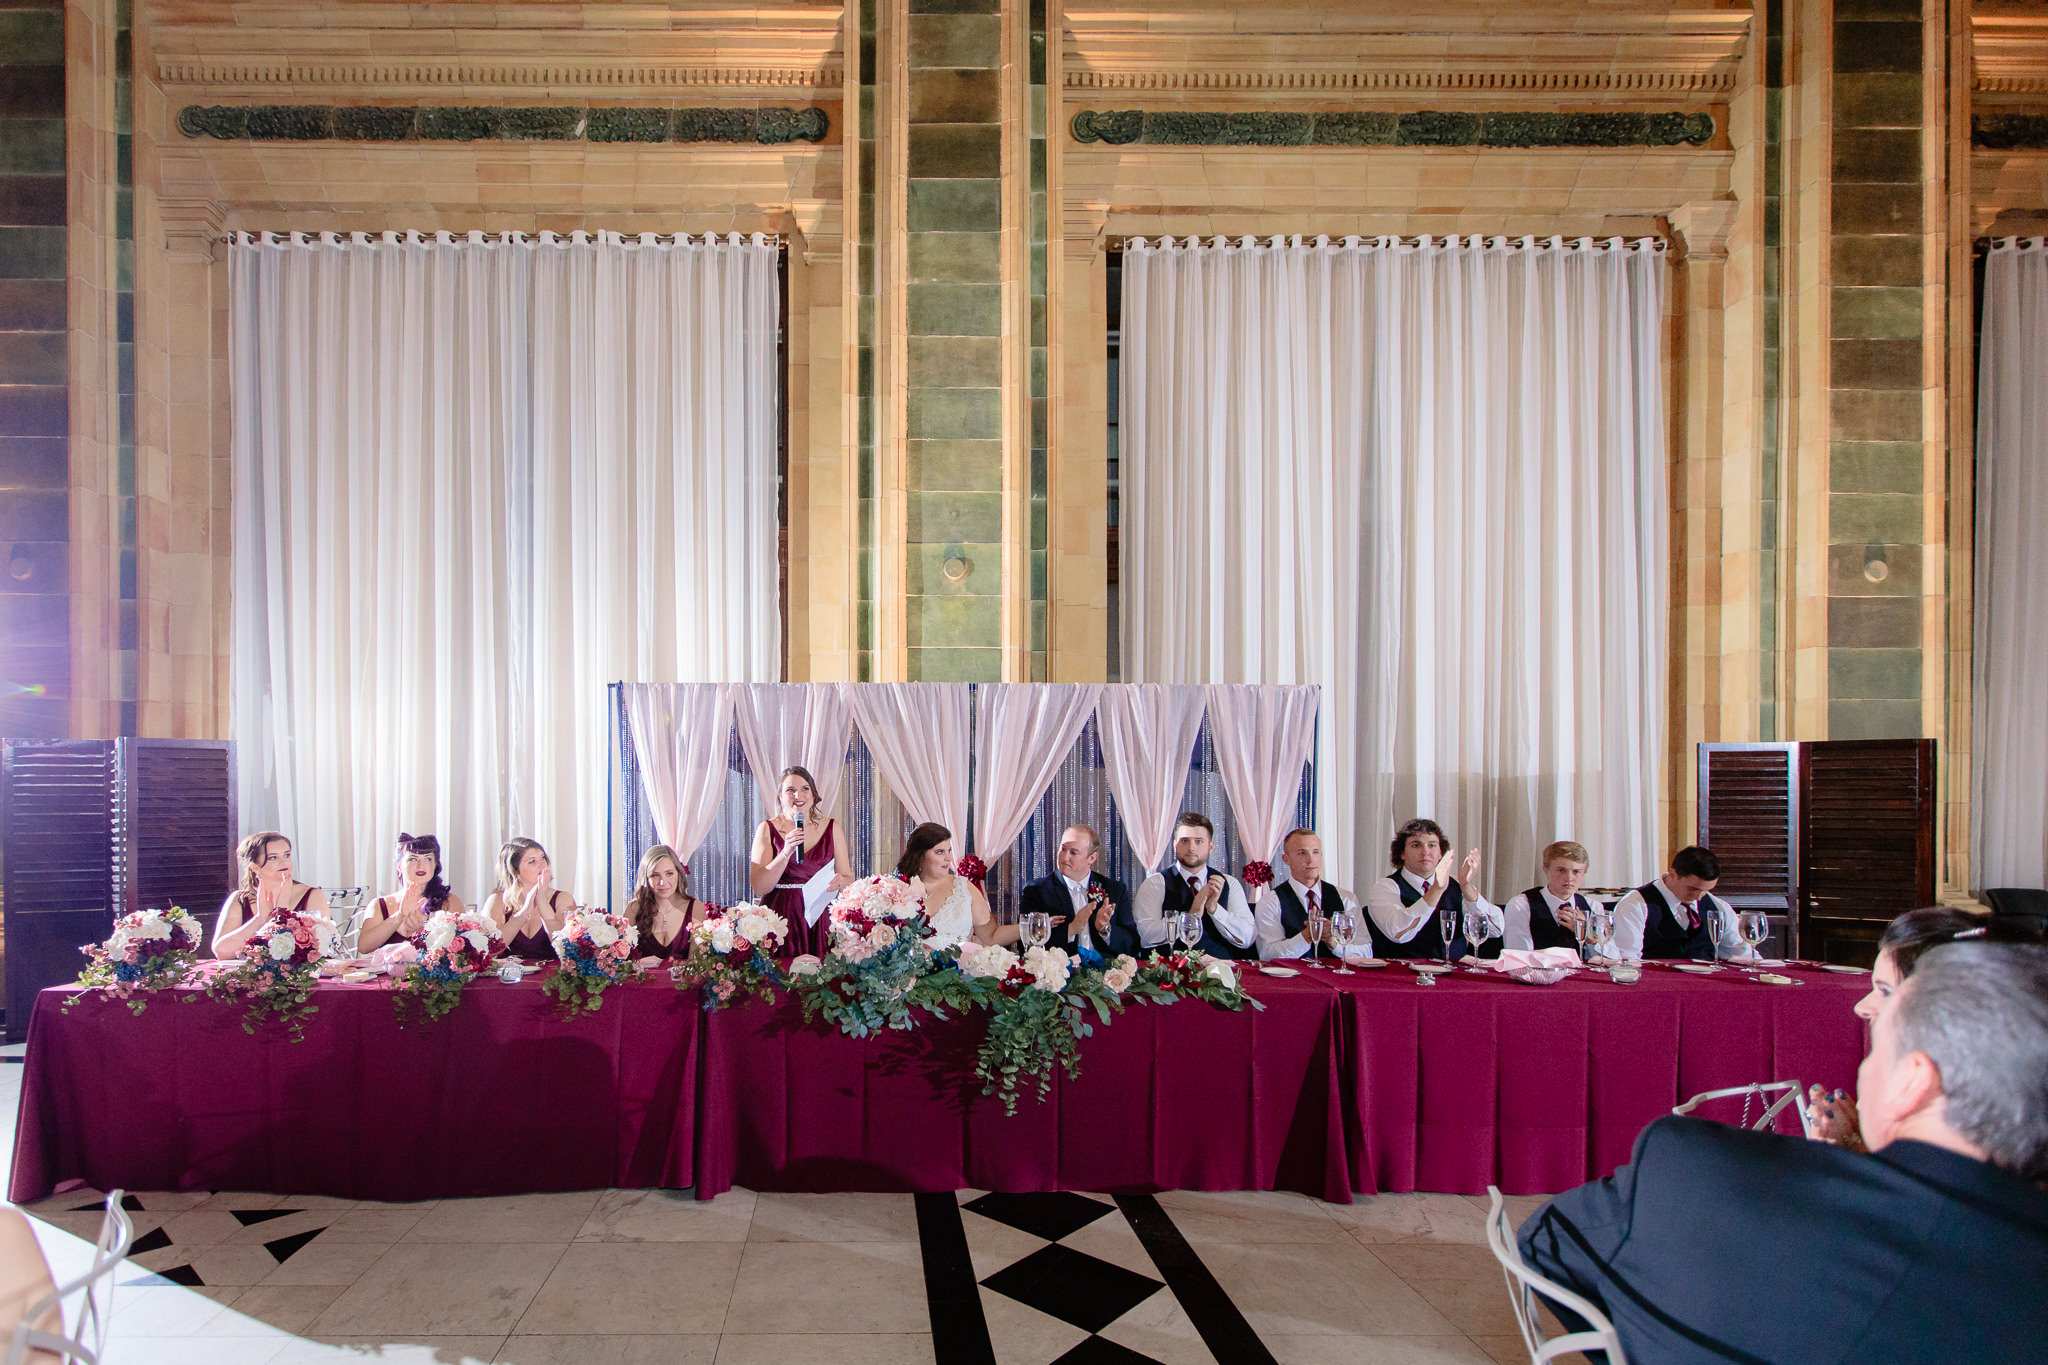 The wedding party sits at the head table at the Pennsylvanian reception